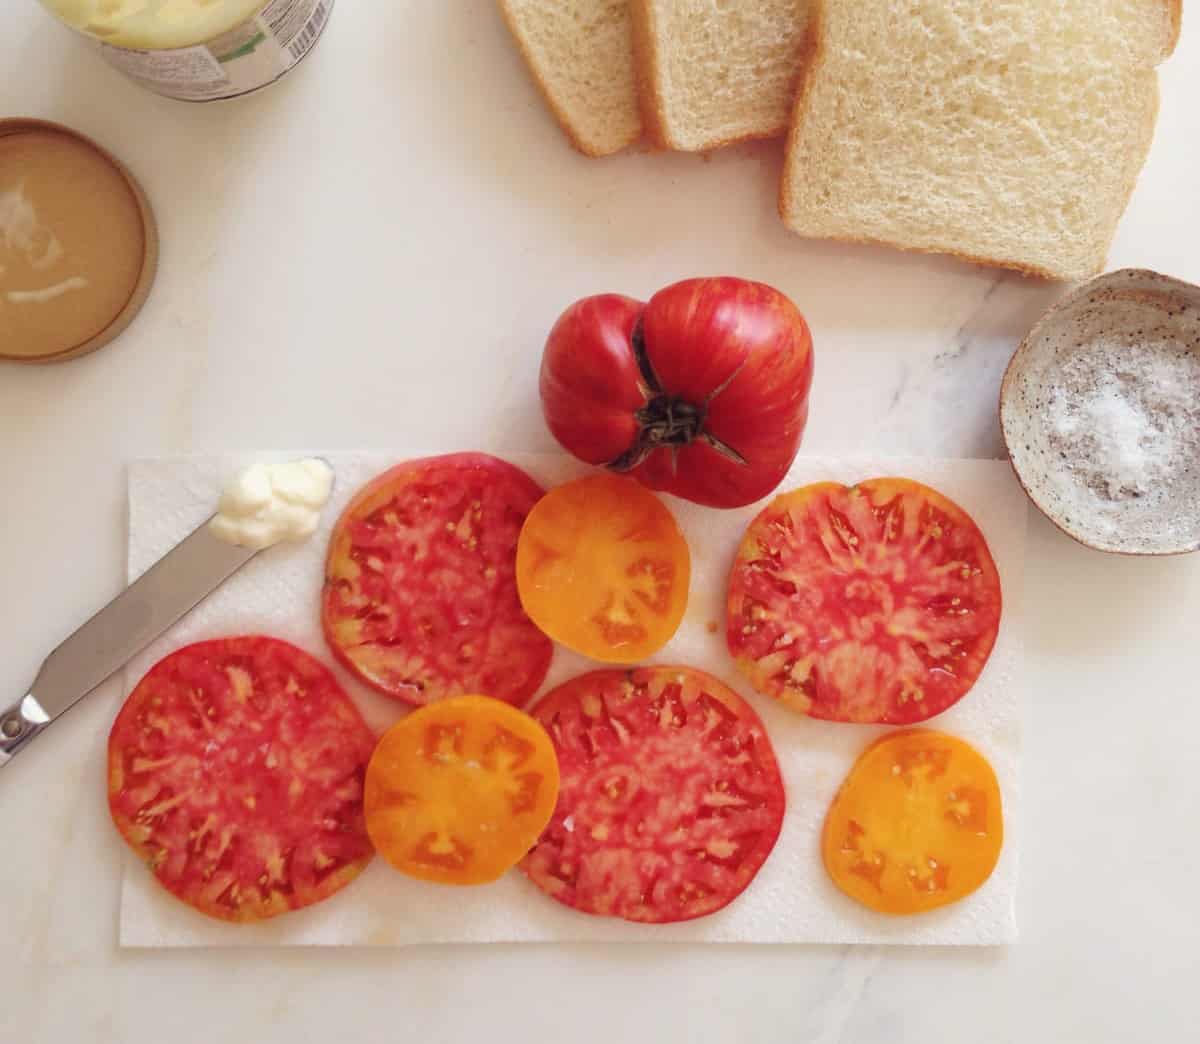 Ingredients for a Tomato Sandwich. 